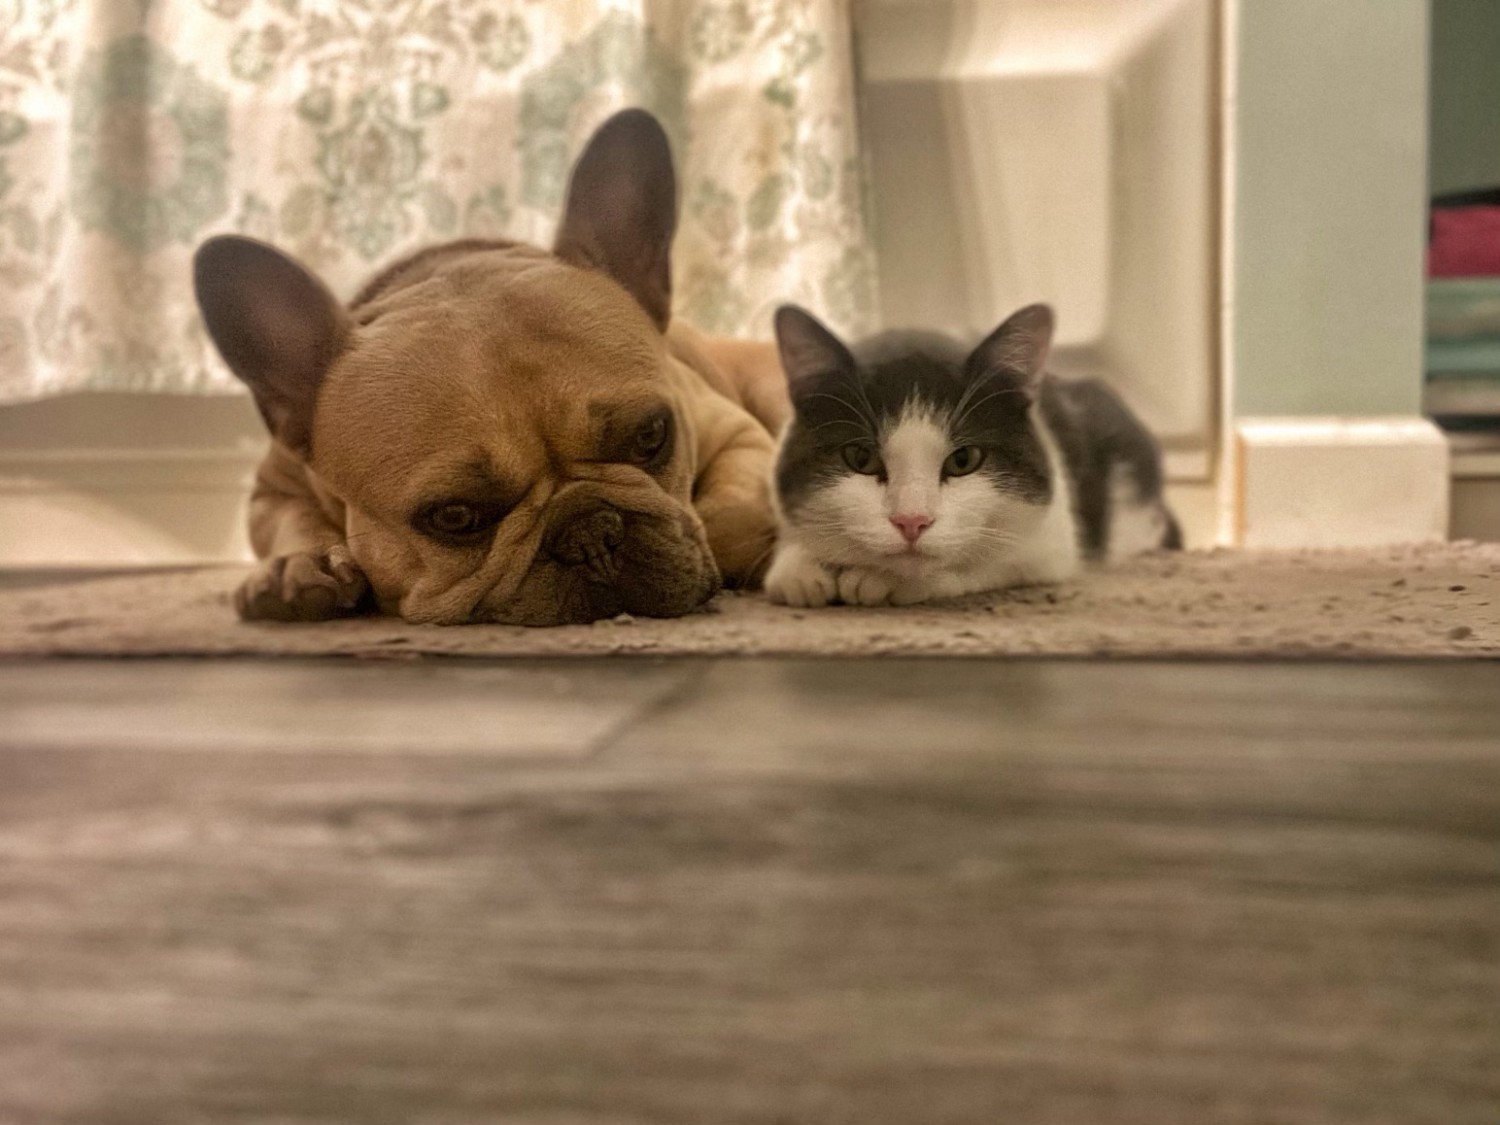 Cat and Dog laying on floor